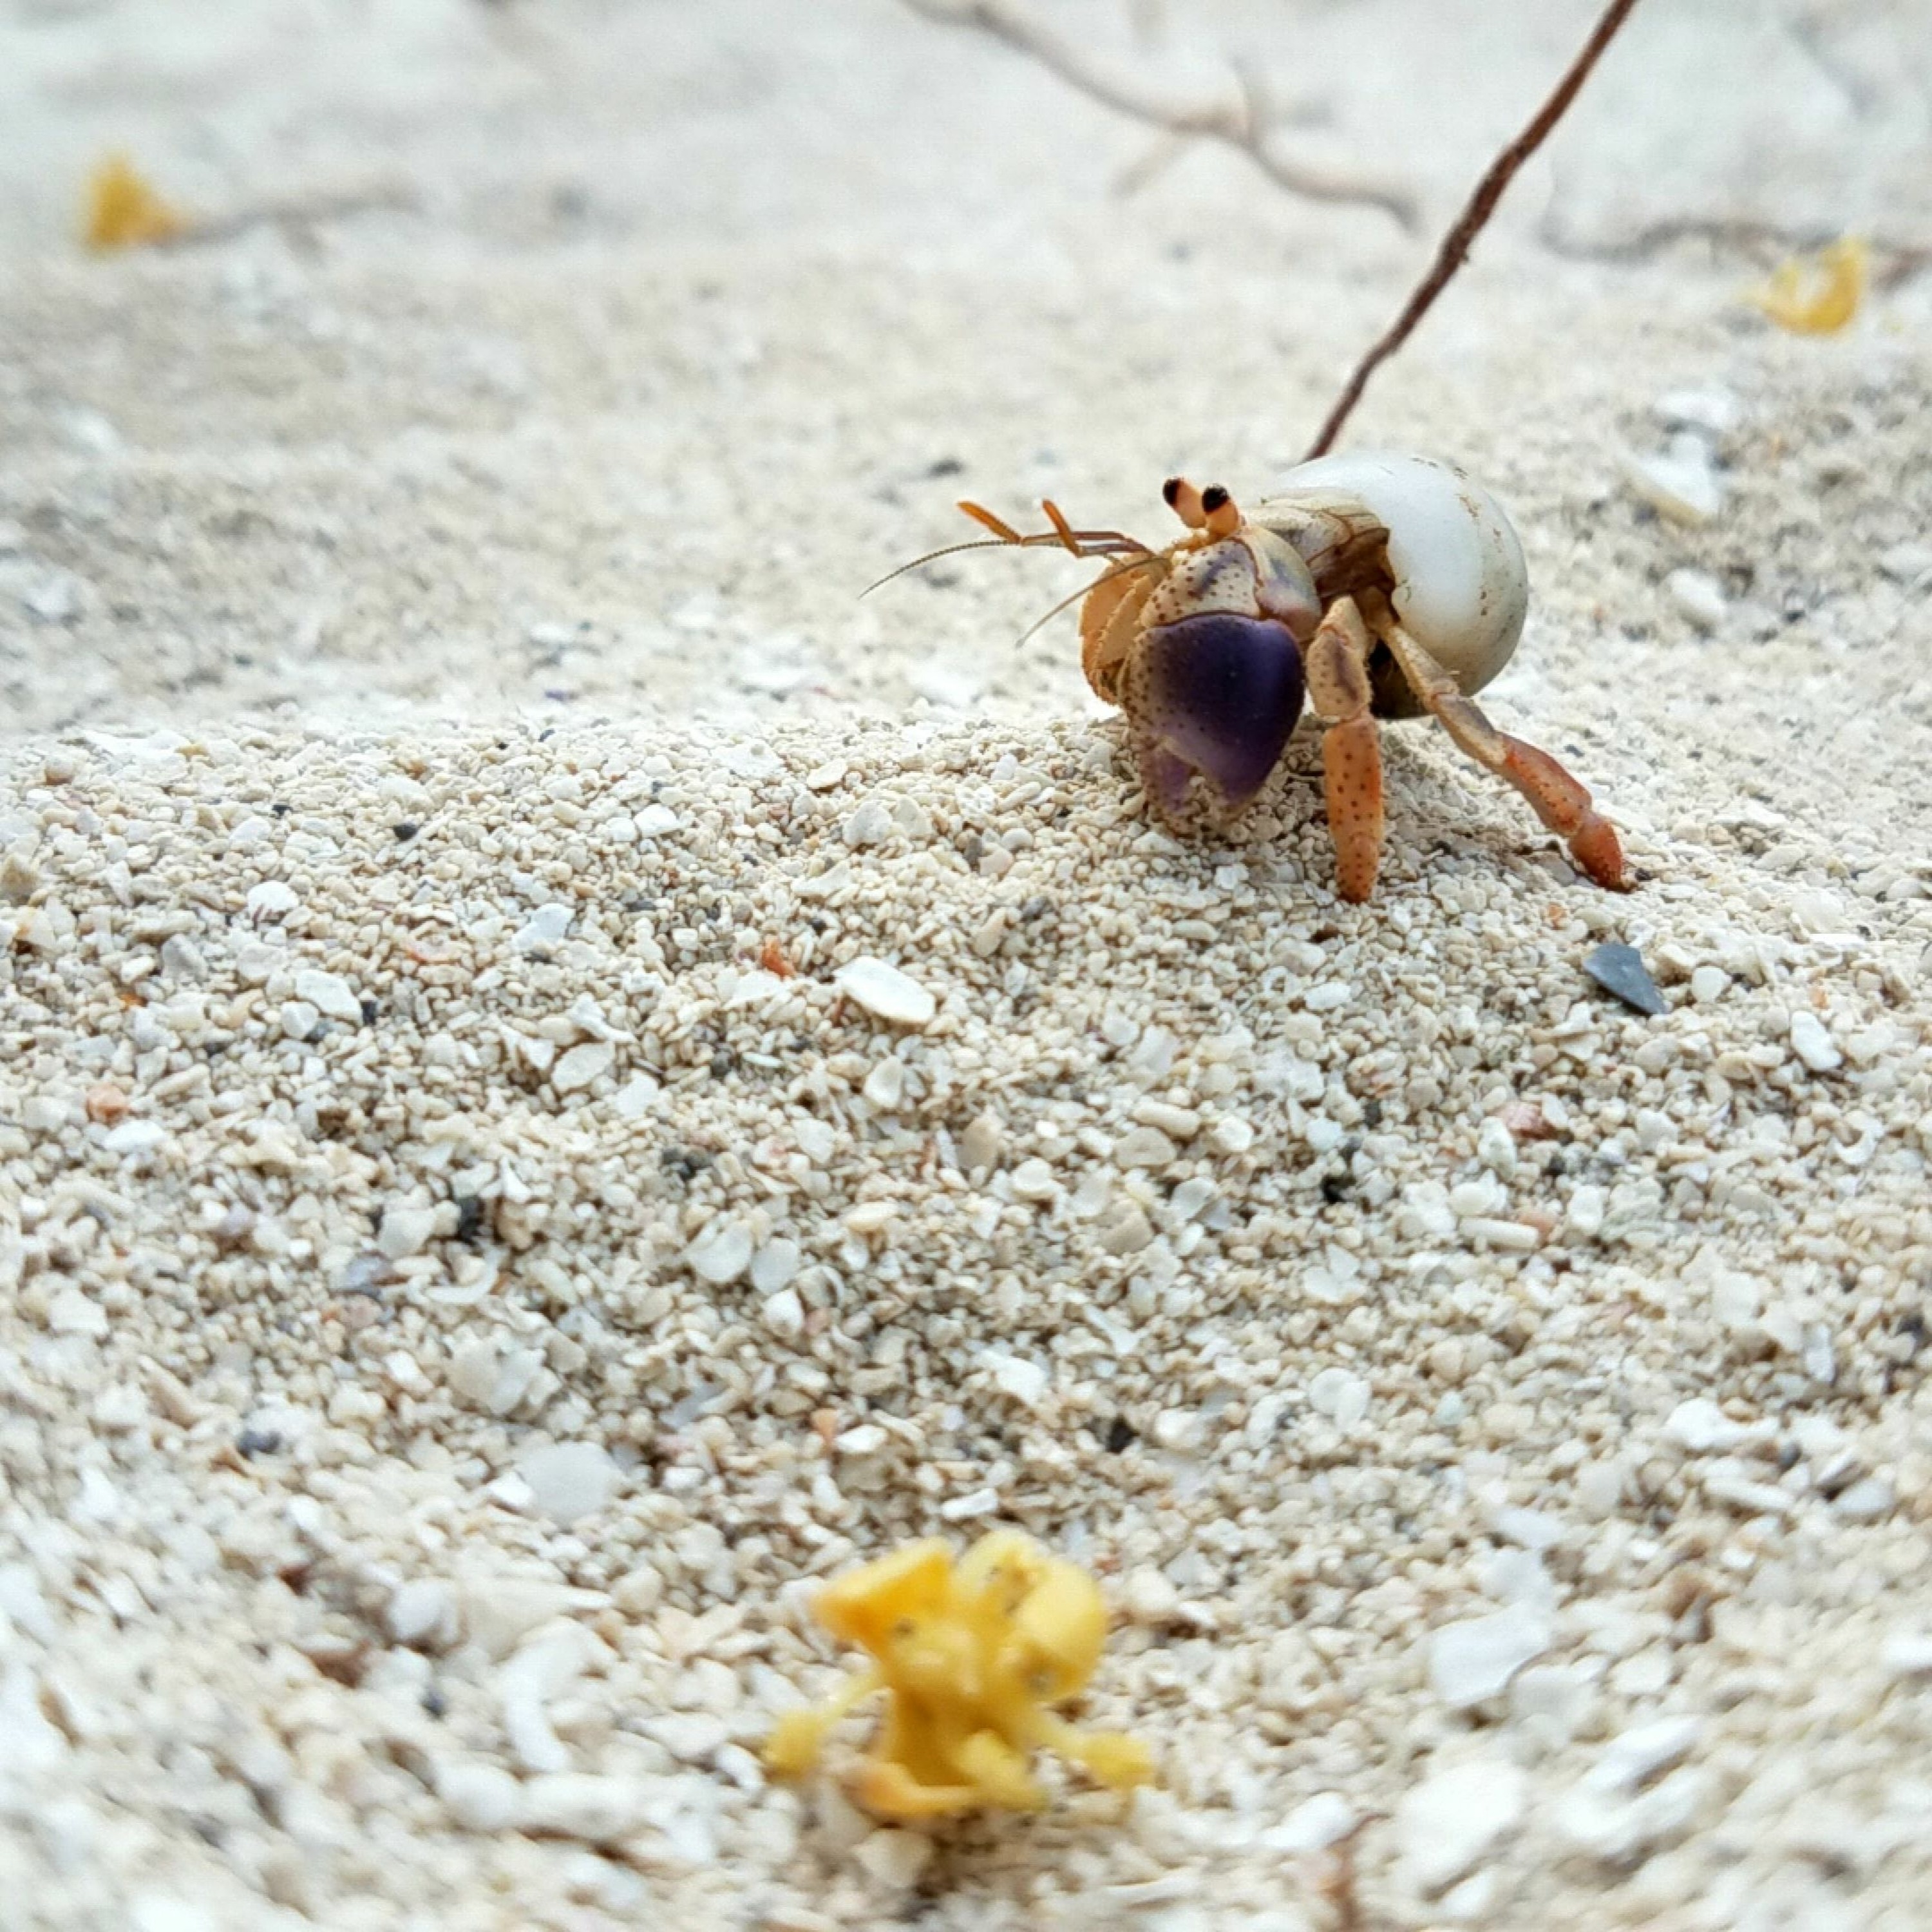 ”Shells that Shift, Faith that Grows:  Lessons from a Hermit (Crab)” by Klarissa Oh